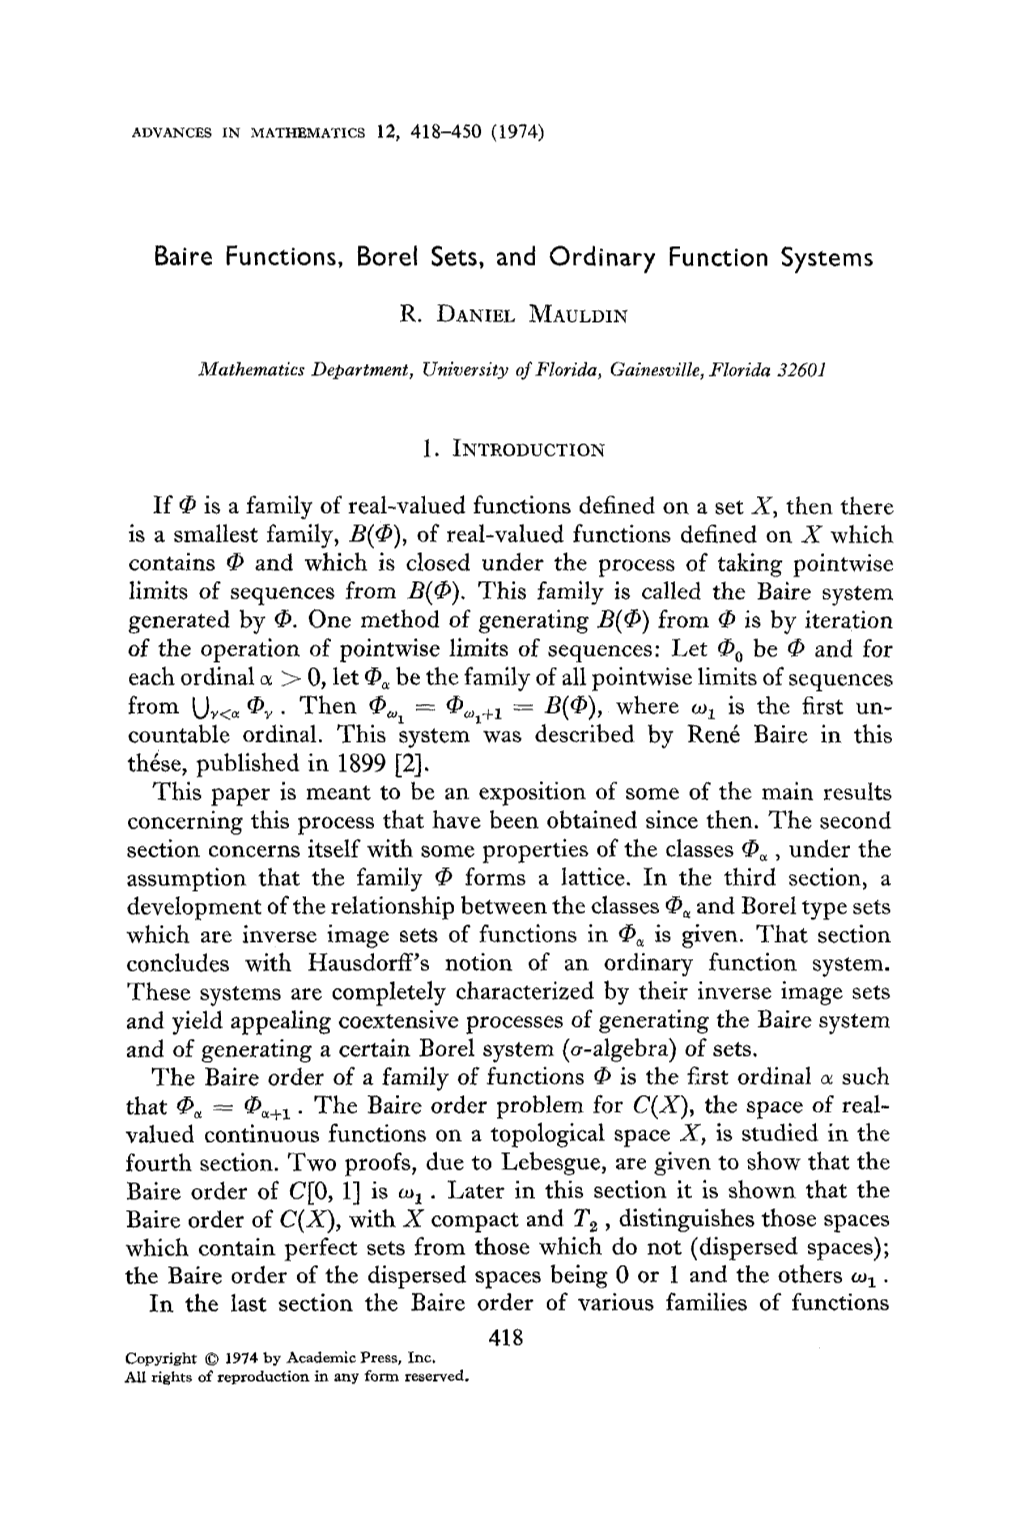 Baire Functions, Borel Sets, and Ordinary Function Systems